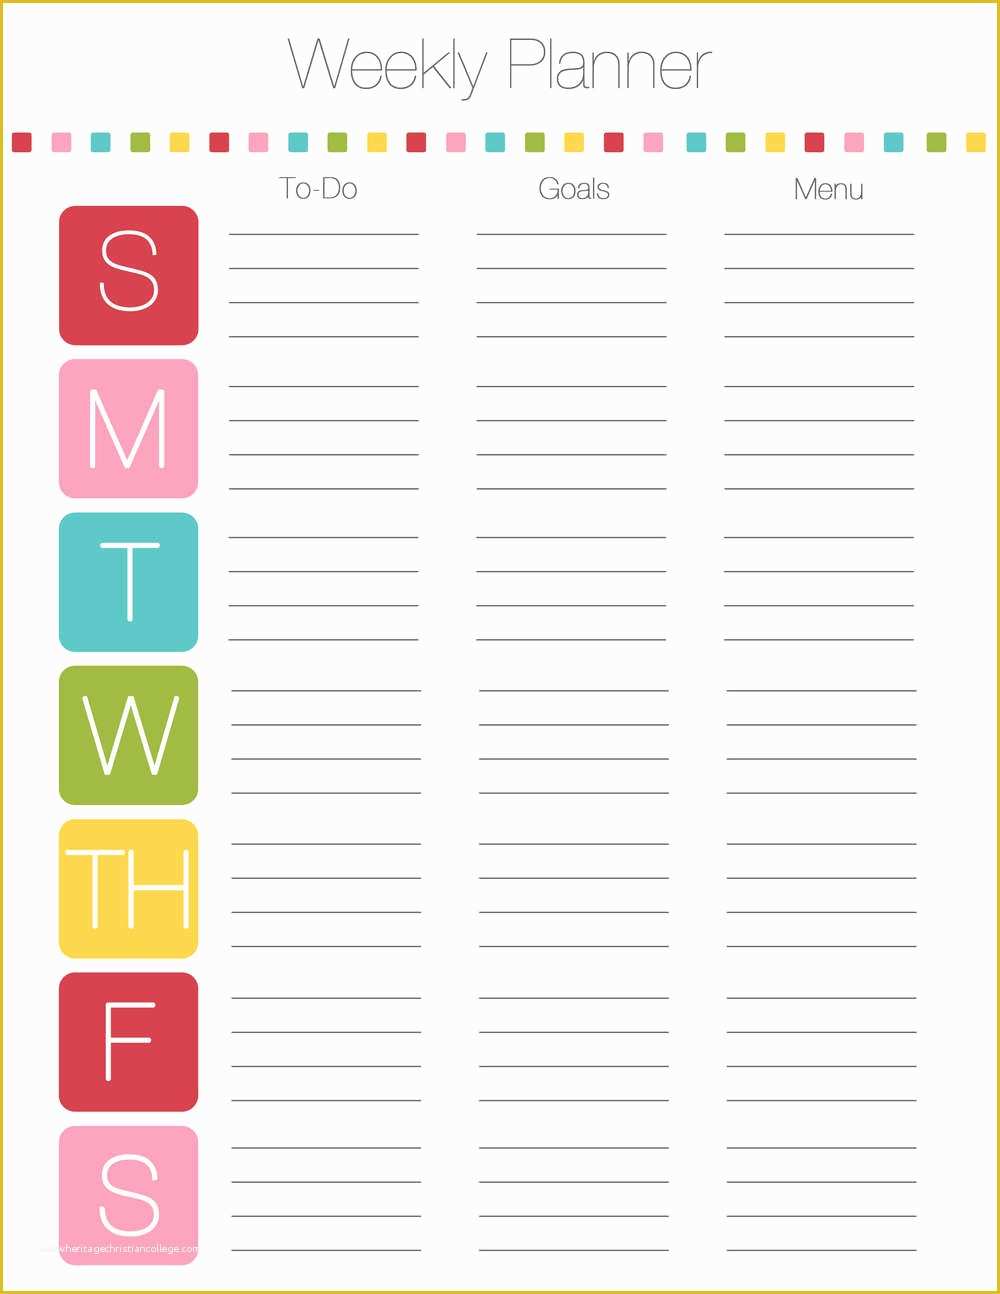 Free Weekly Agenda Templates Of Newsletter Free Printables I Heart Nap Time